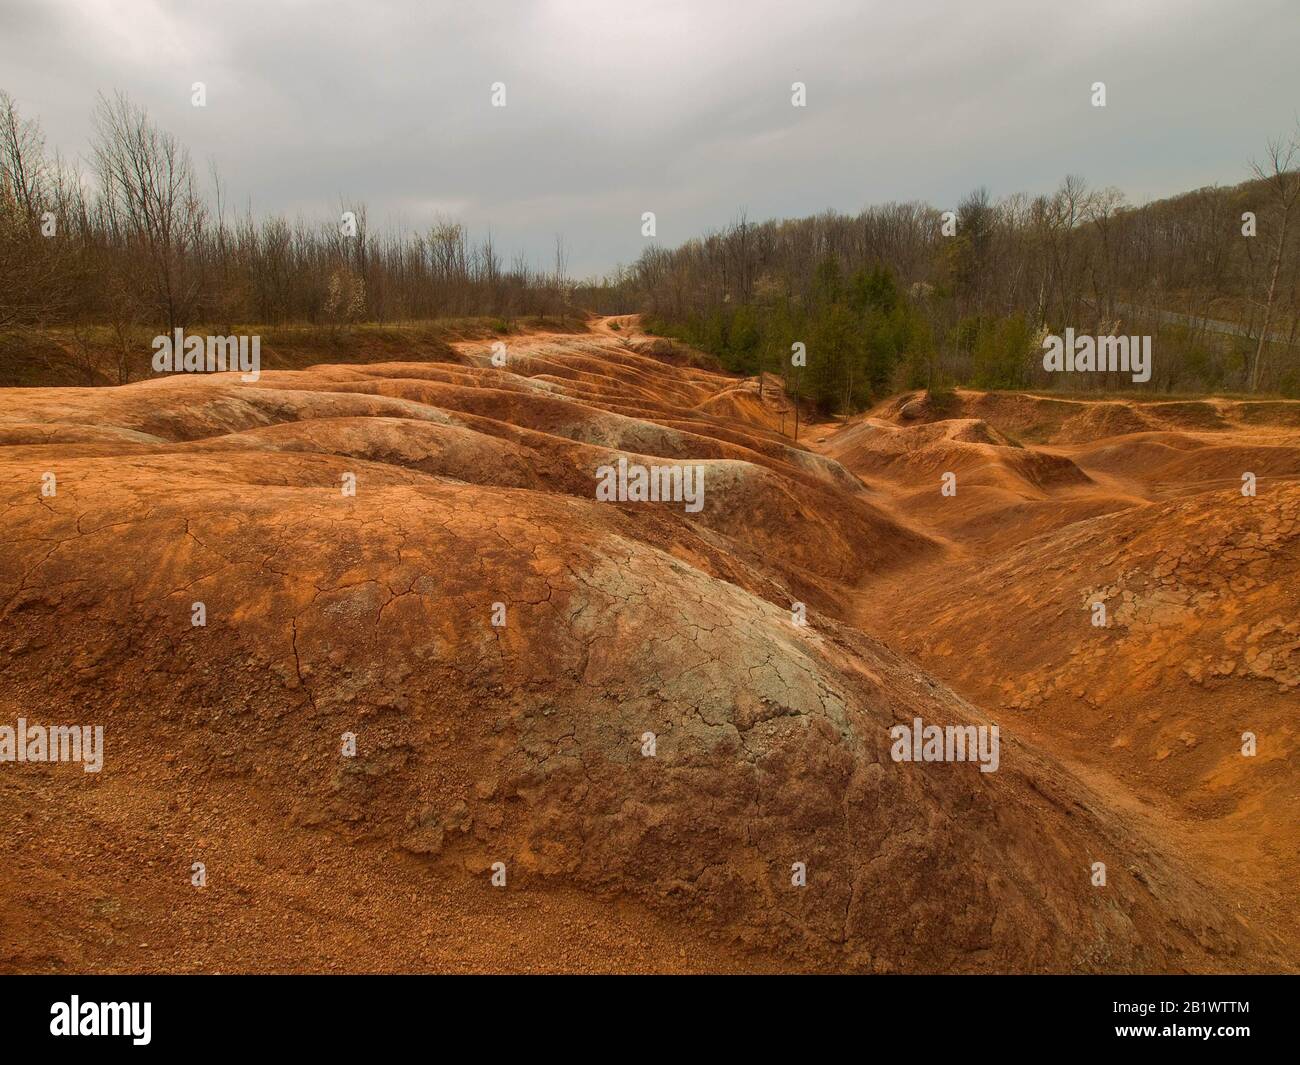 beautiful view of clay soil in a quarry Stock Photo